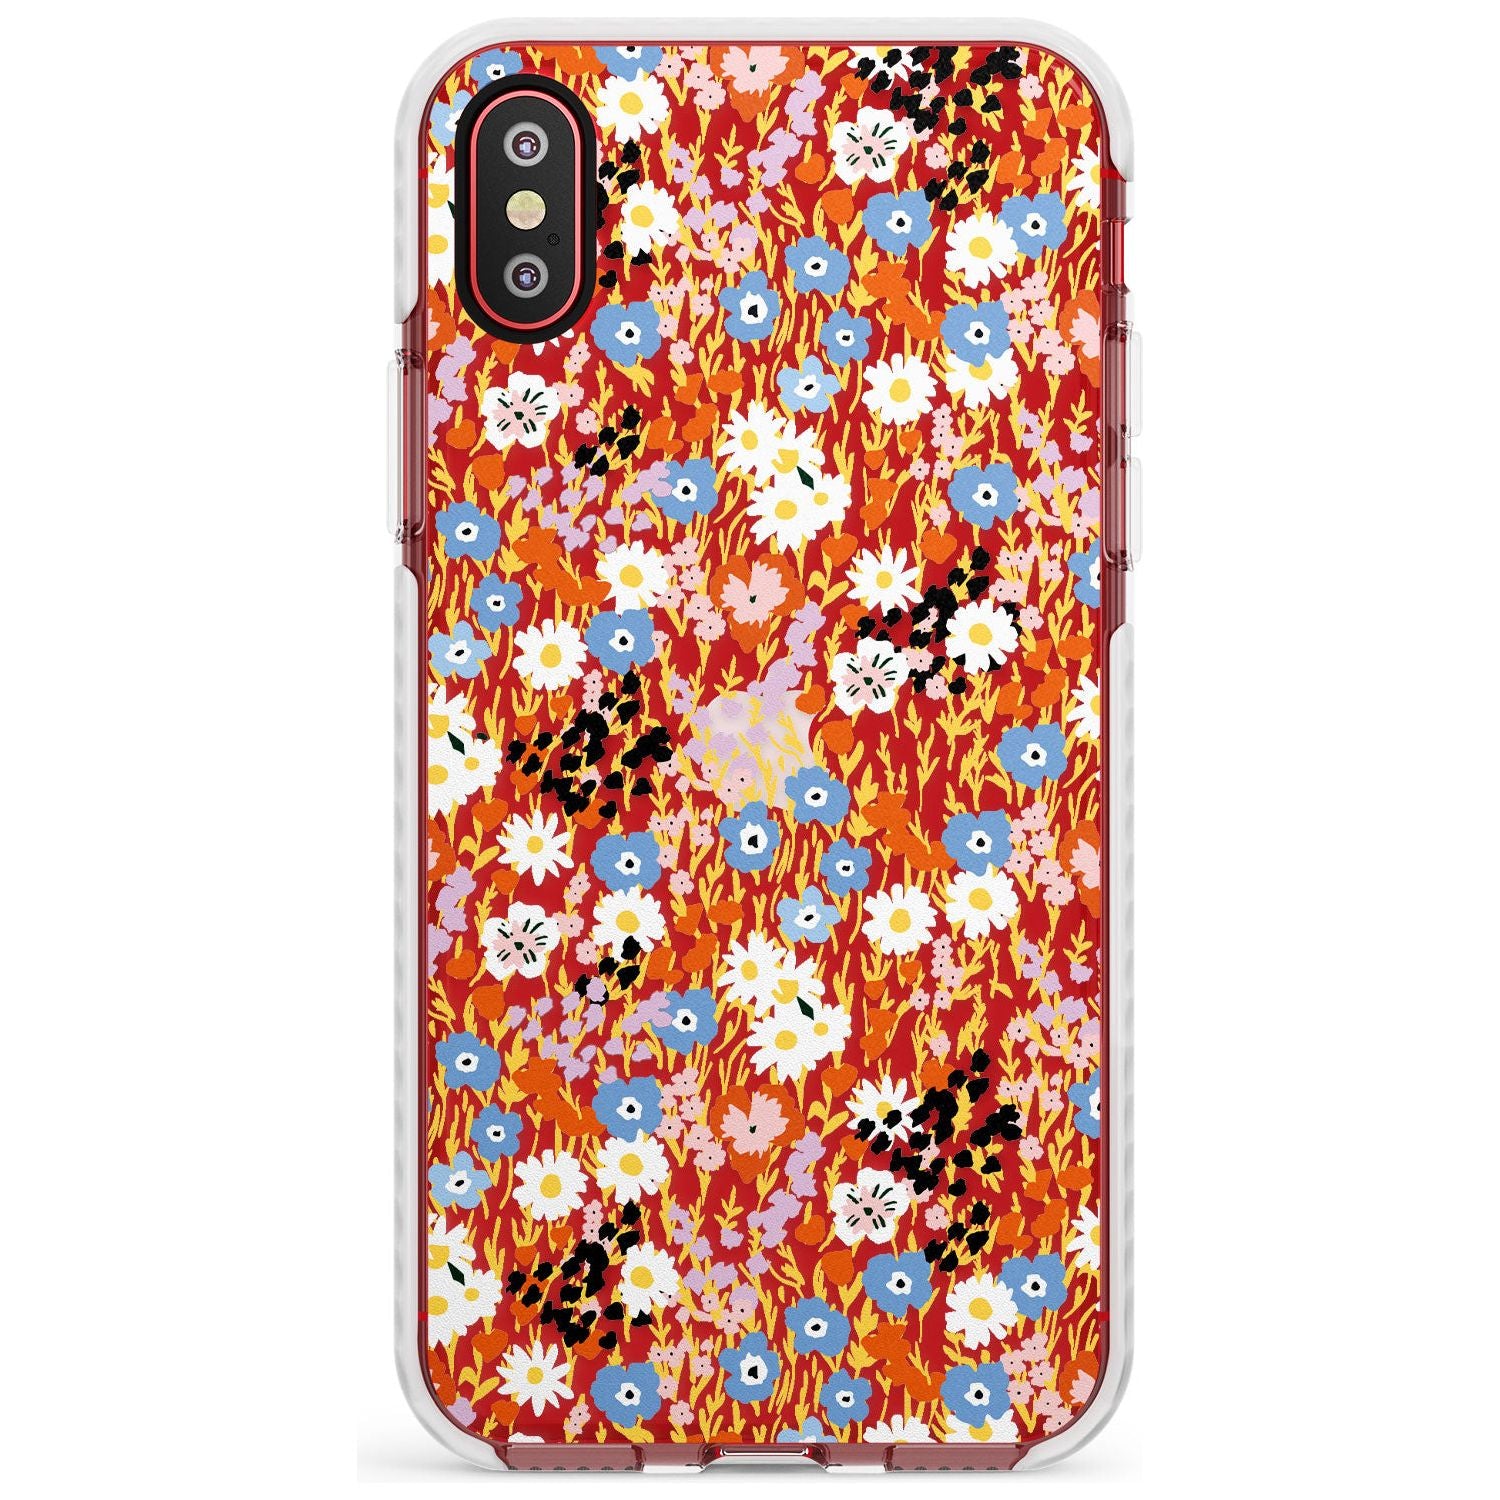 Busy Floral Mix: Transparent Slim TPU Phone Case Warehouse X XS Max XR